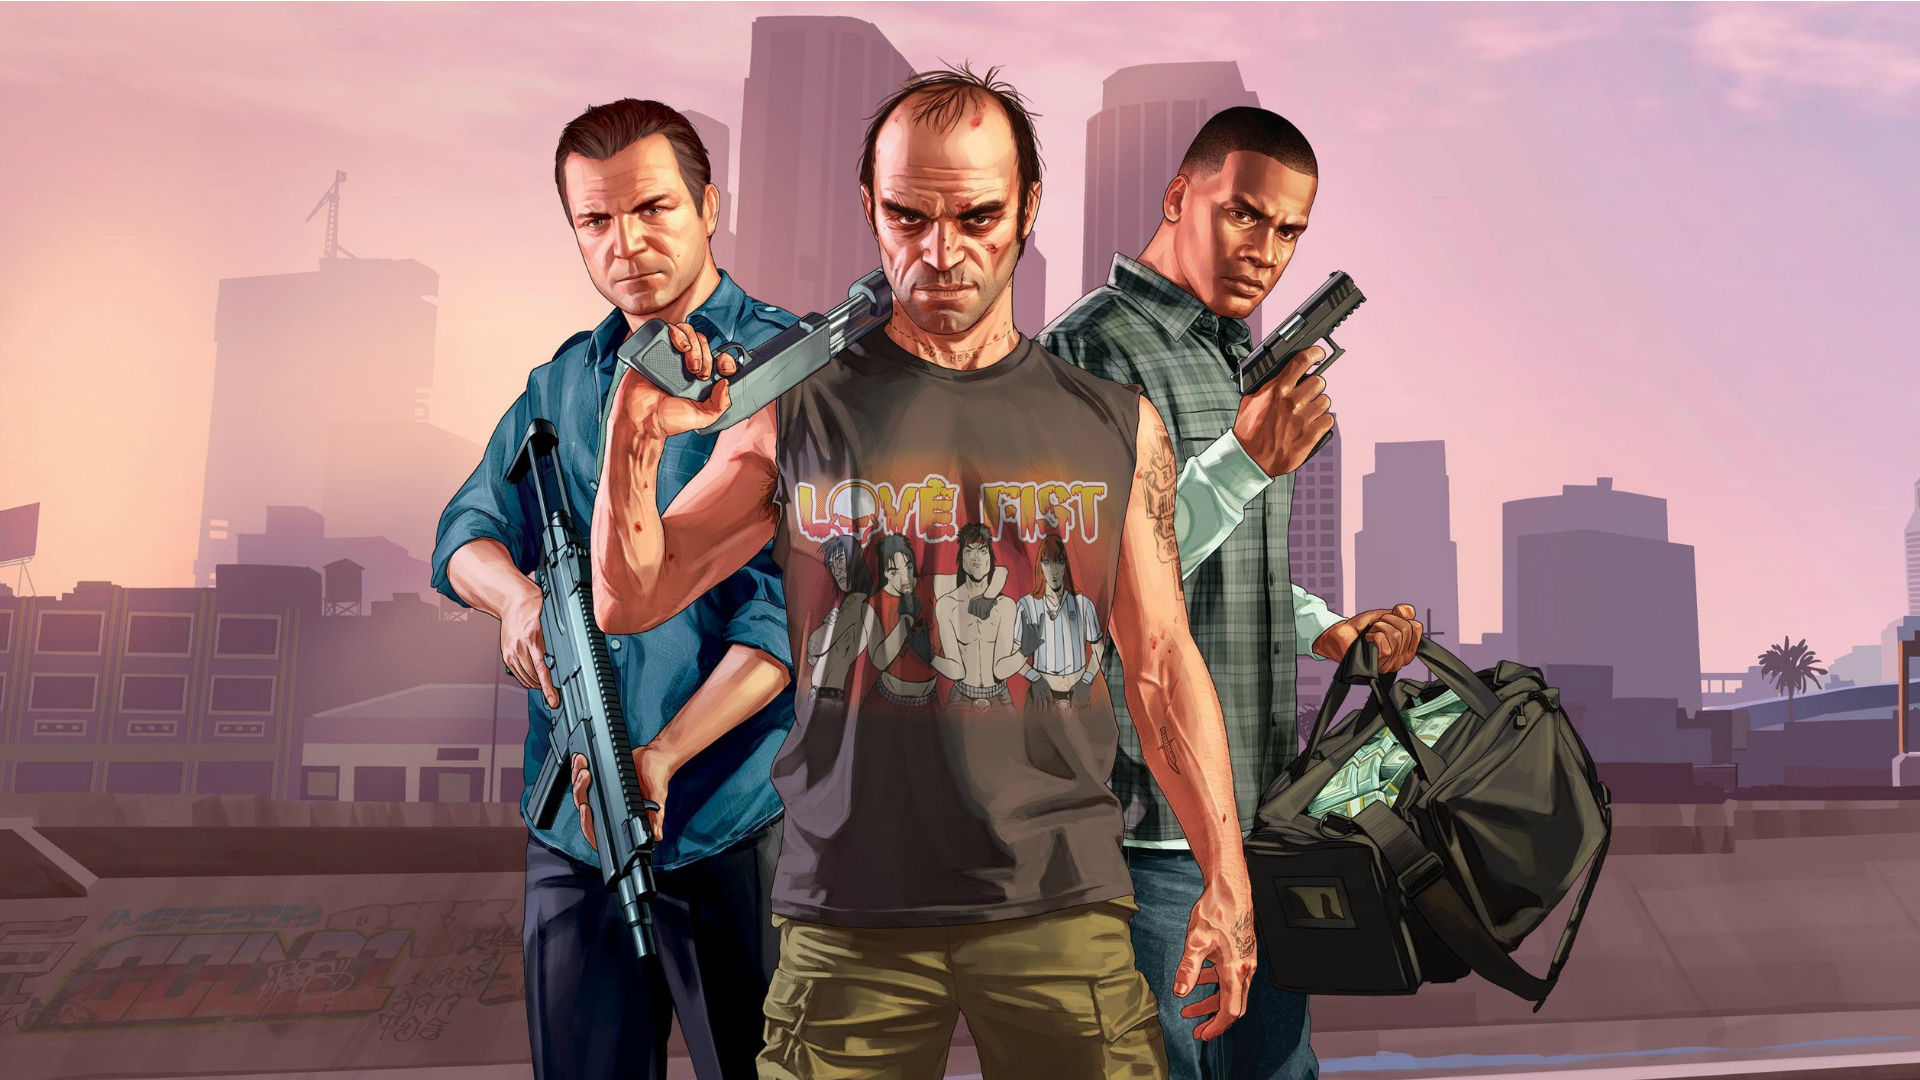 Grand Theft Auto: The Trilogy to Release on Mobiles in March 2023